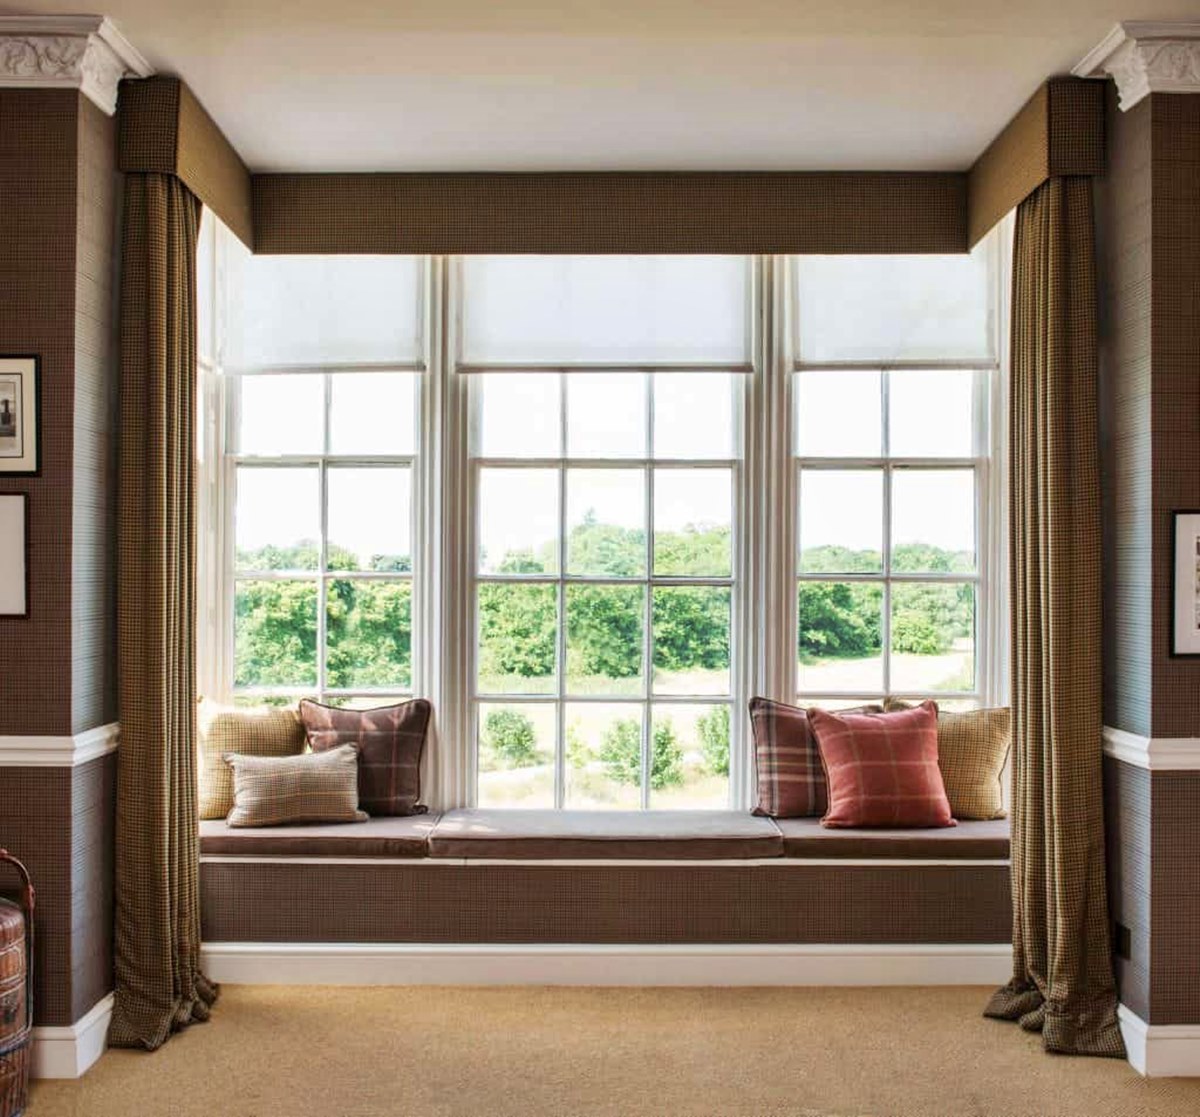 How To Curtain Bay Windows